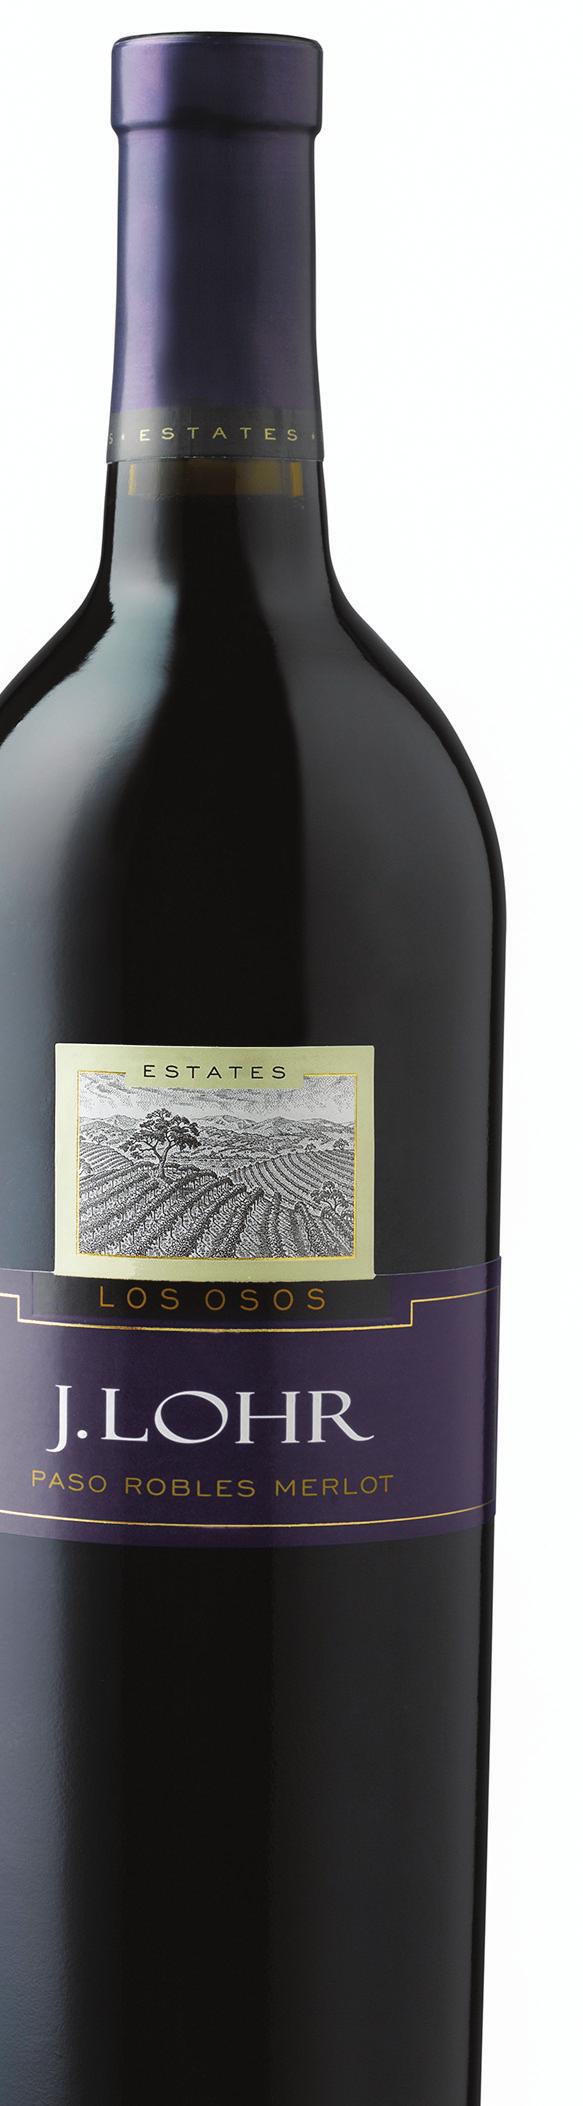 2013 J. LOHR ESTATES LOS OSOS MERLOT paso robles Have you ever noticed how good things often come in threes?